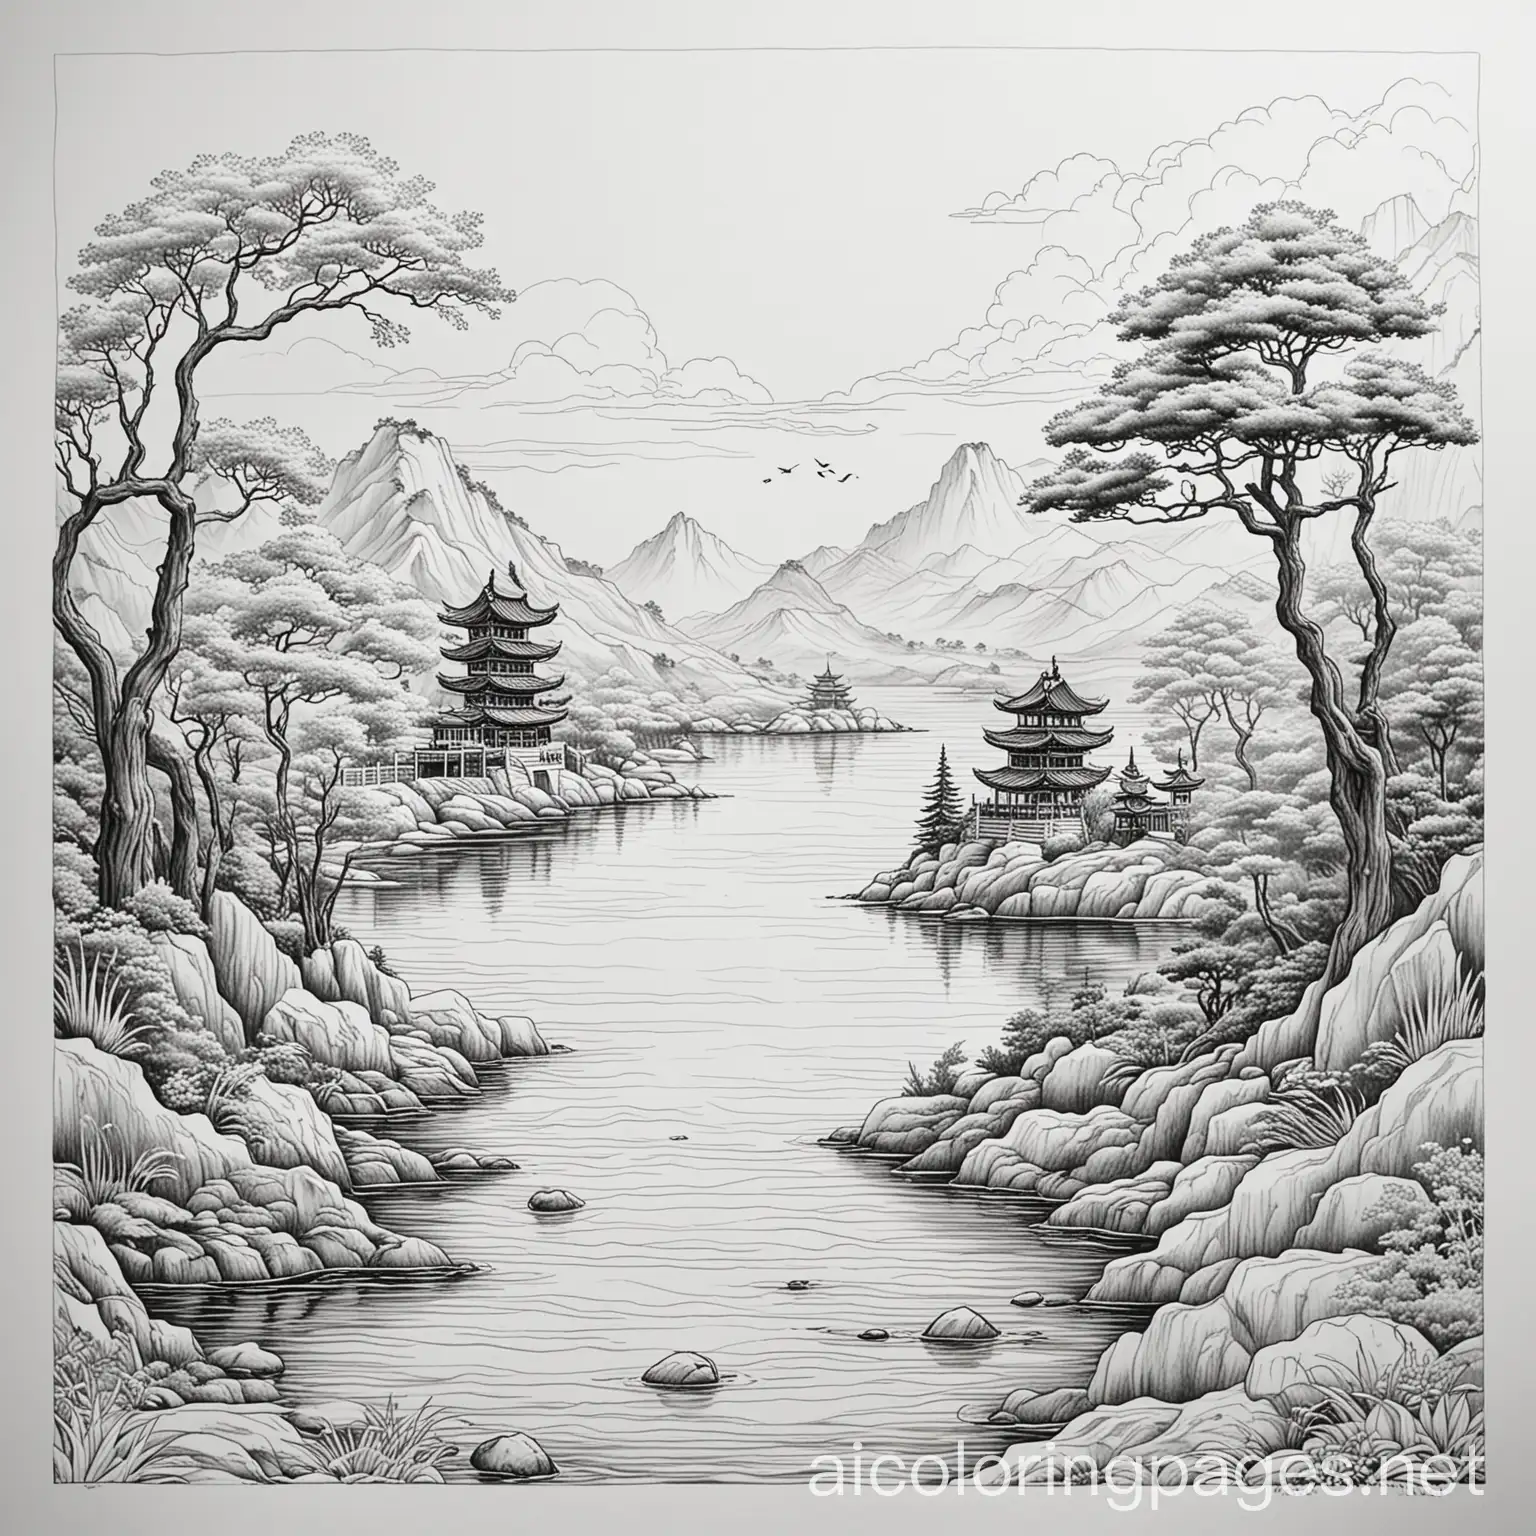 user_prompt: Scenic water view, sculpture, metal, new Chinese style, Coloring Page, black and white, line art, white background, Simplicity, Ample White Space. The background of the coloring page is plain white to make it easy for young children to color within the lines. The outlines of all the subjects are easy to distinguish, making it simple for kids to color without too much difficulty